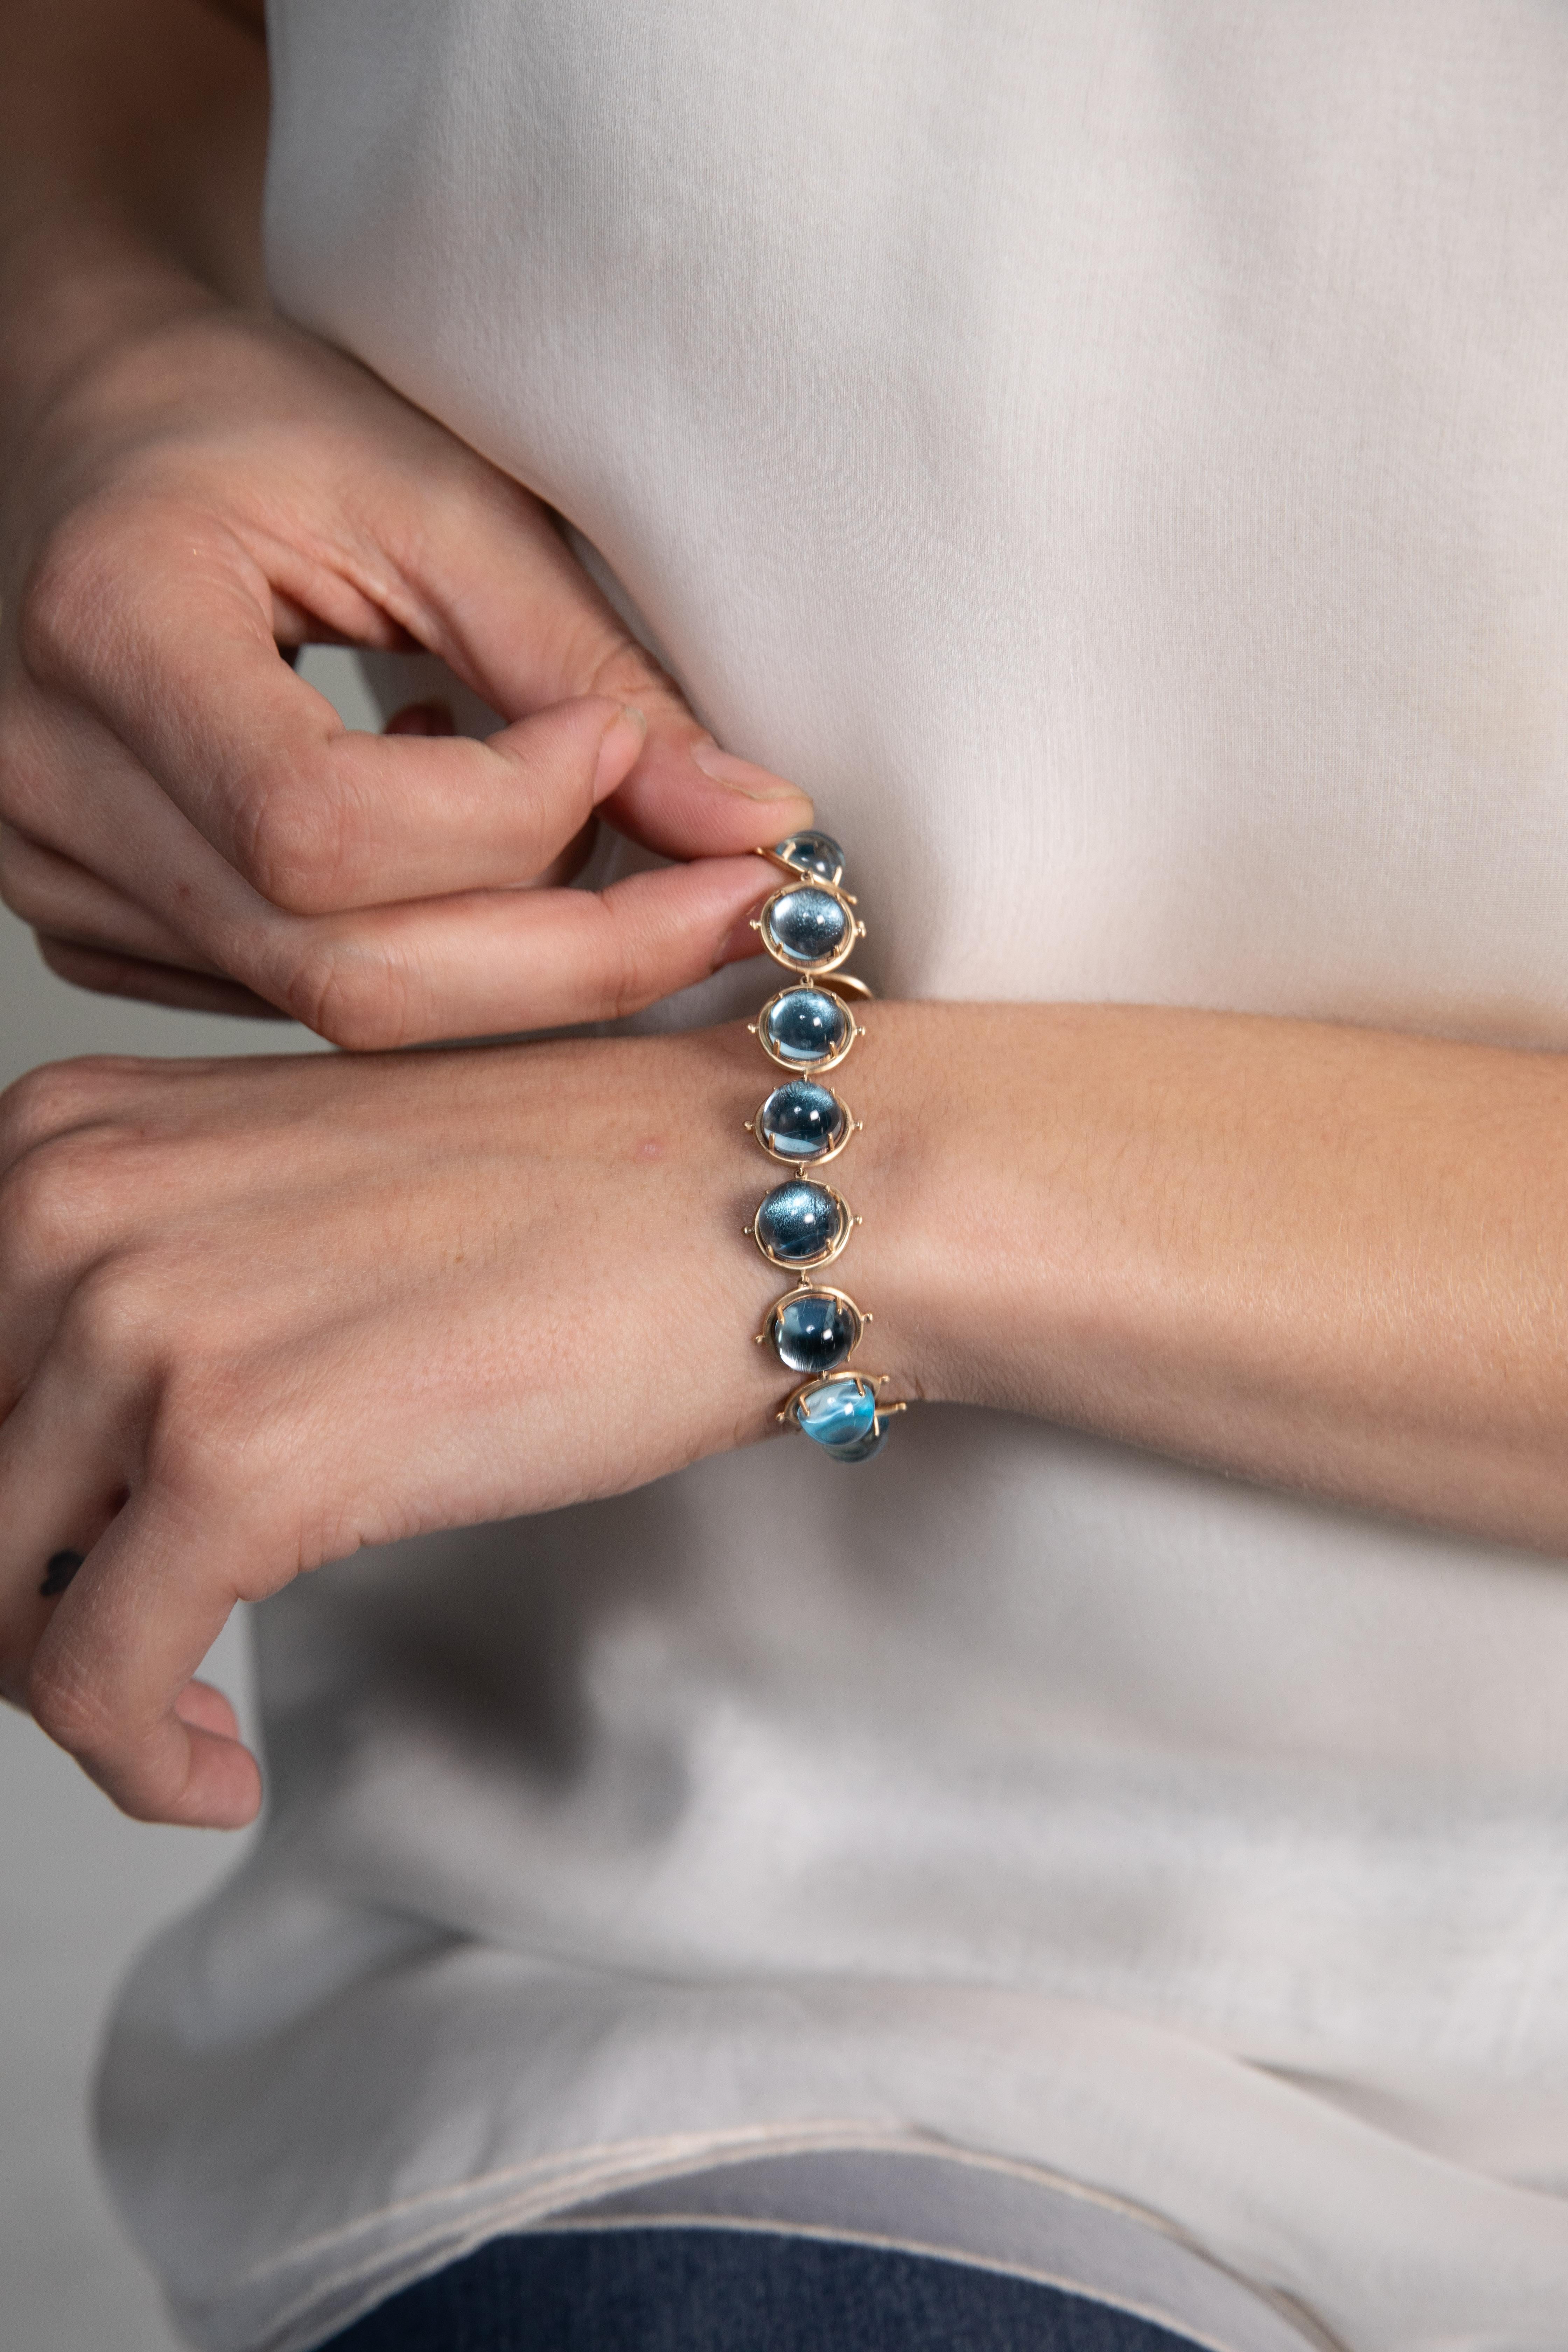 Blue Topaz round link bracelet is fashioned in 14K yellow polish gold and set with 14- 9mm topaz cabochon stones. Made in the United States in 2019.  Measures 11mm wide by 7 inches. Clasp: push clasp with a safety hook for extra protection.

